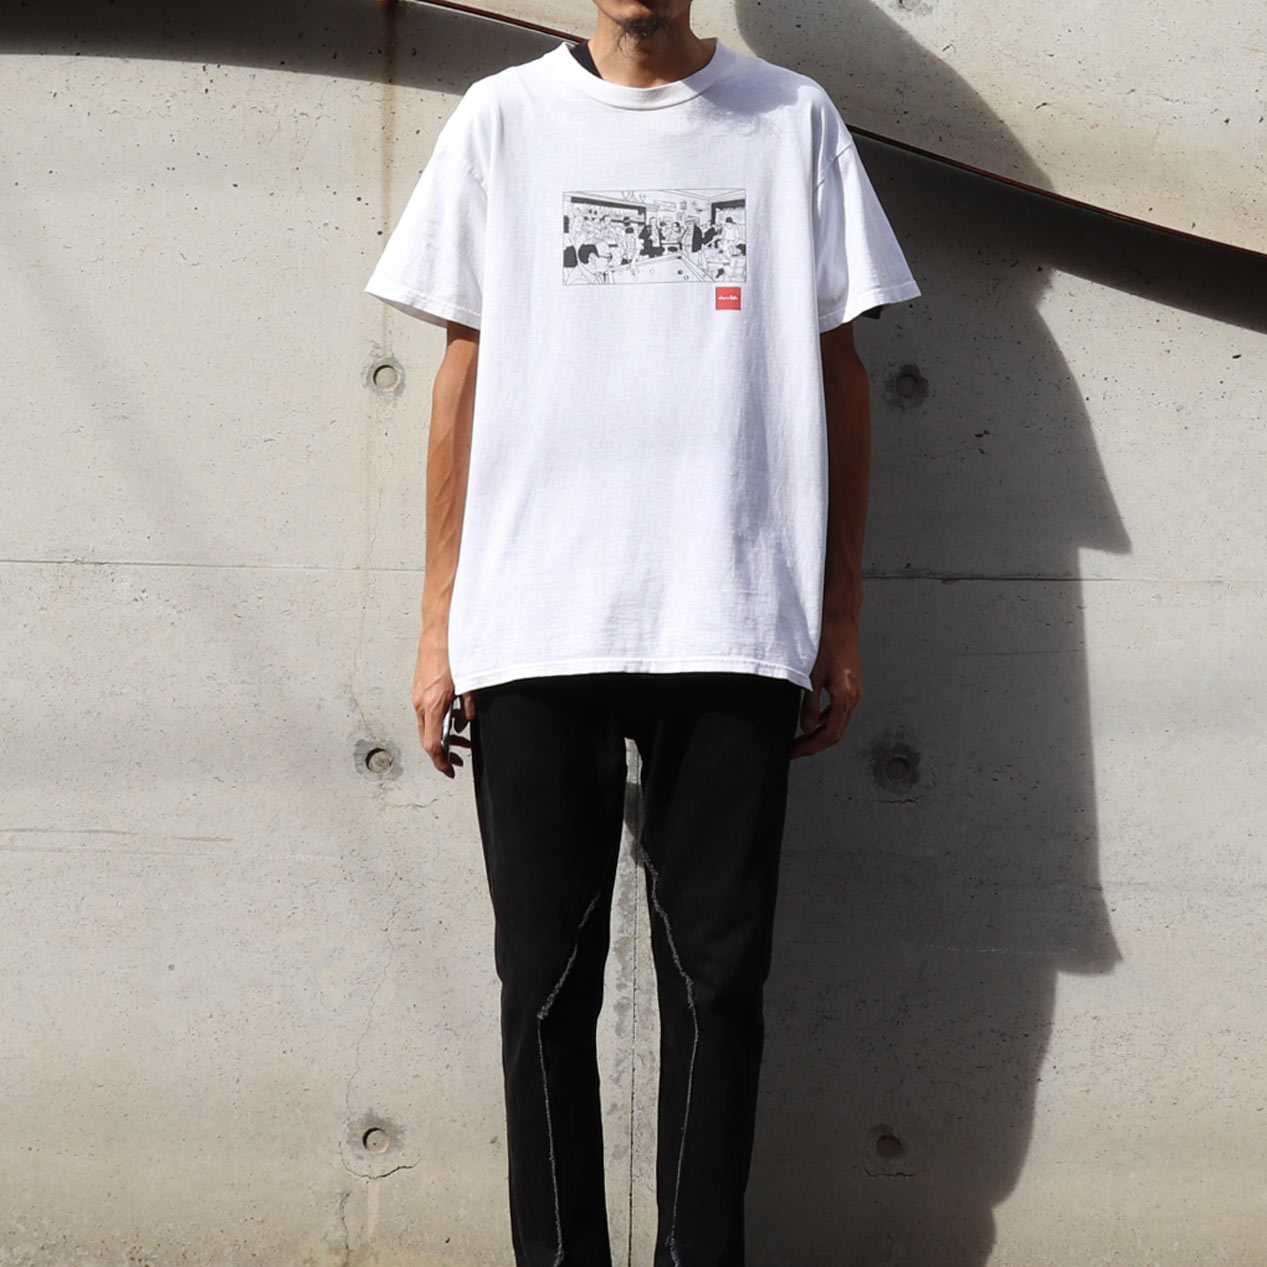 POST JUNK / 90's～ CHOCOLATE SKATEBOARDS Tシャツ [M]